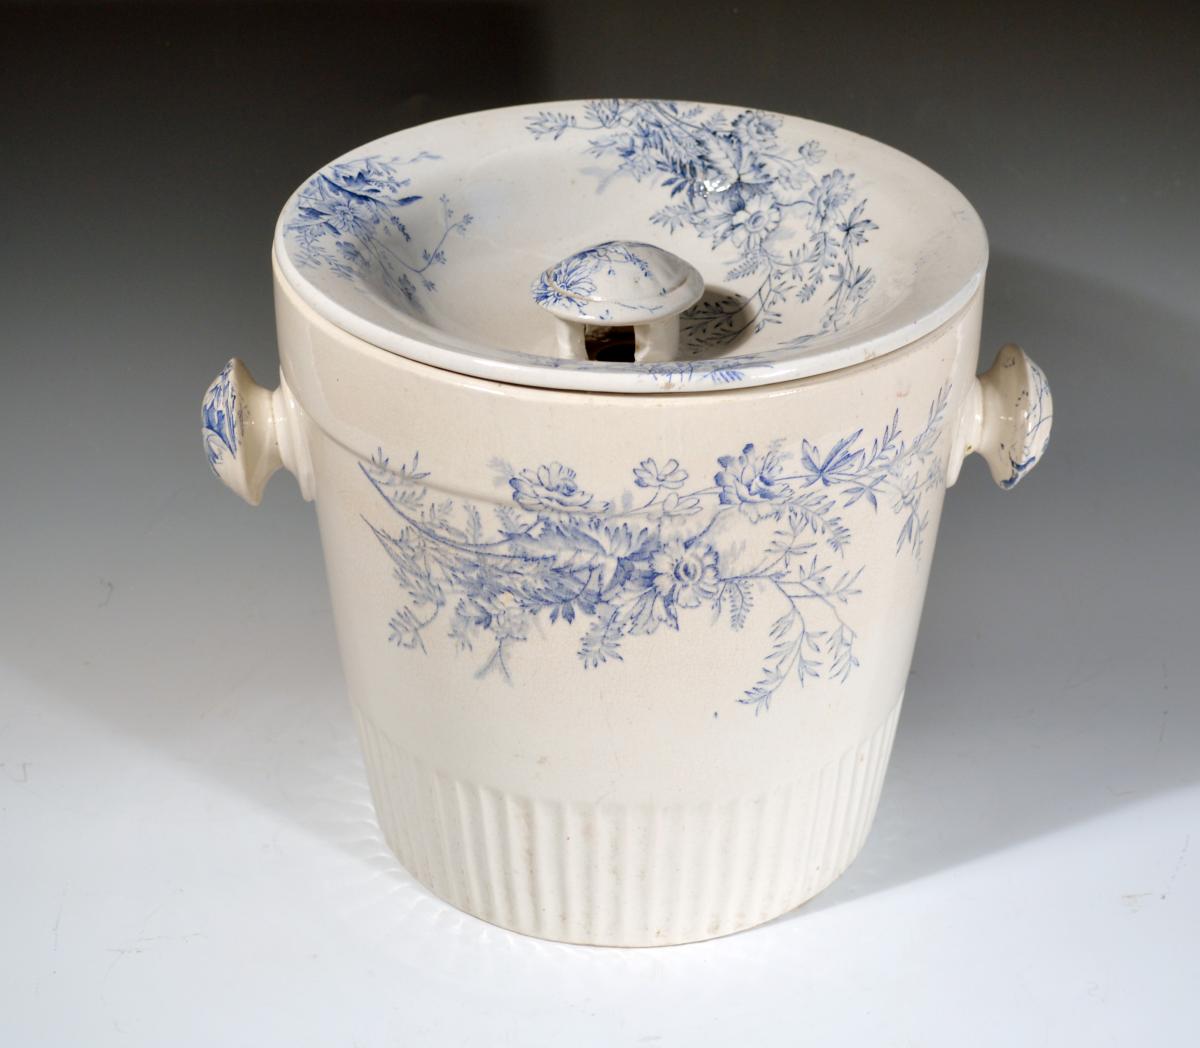 Maling Pottery Pail & Cover, Cetem Ware, 1908-30